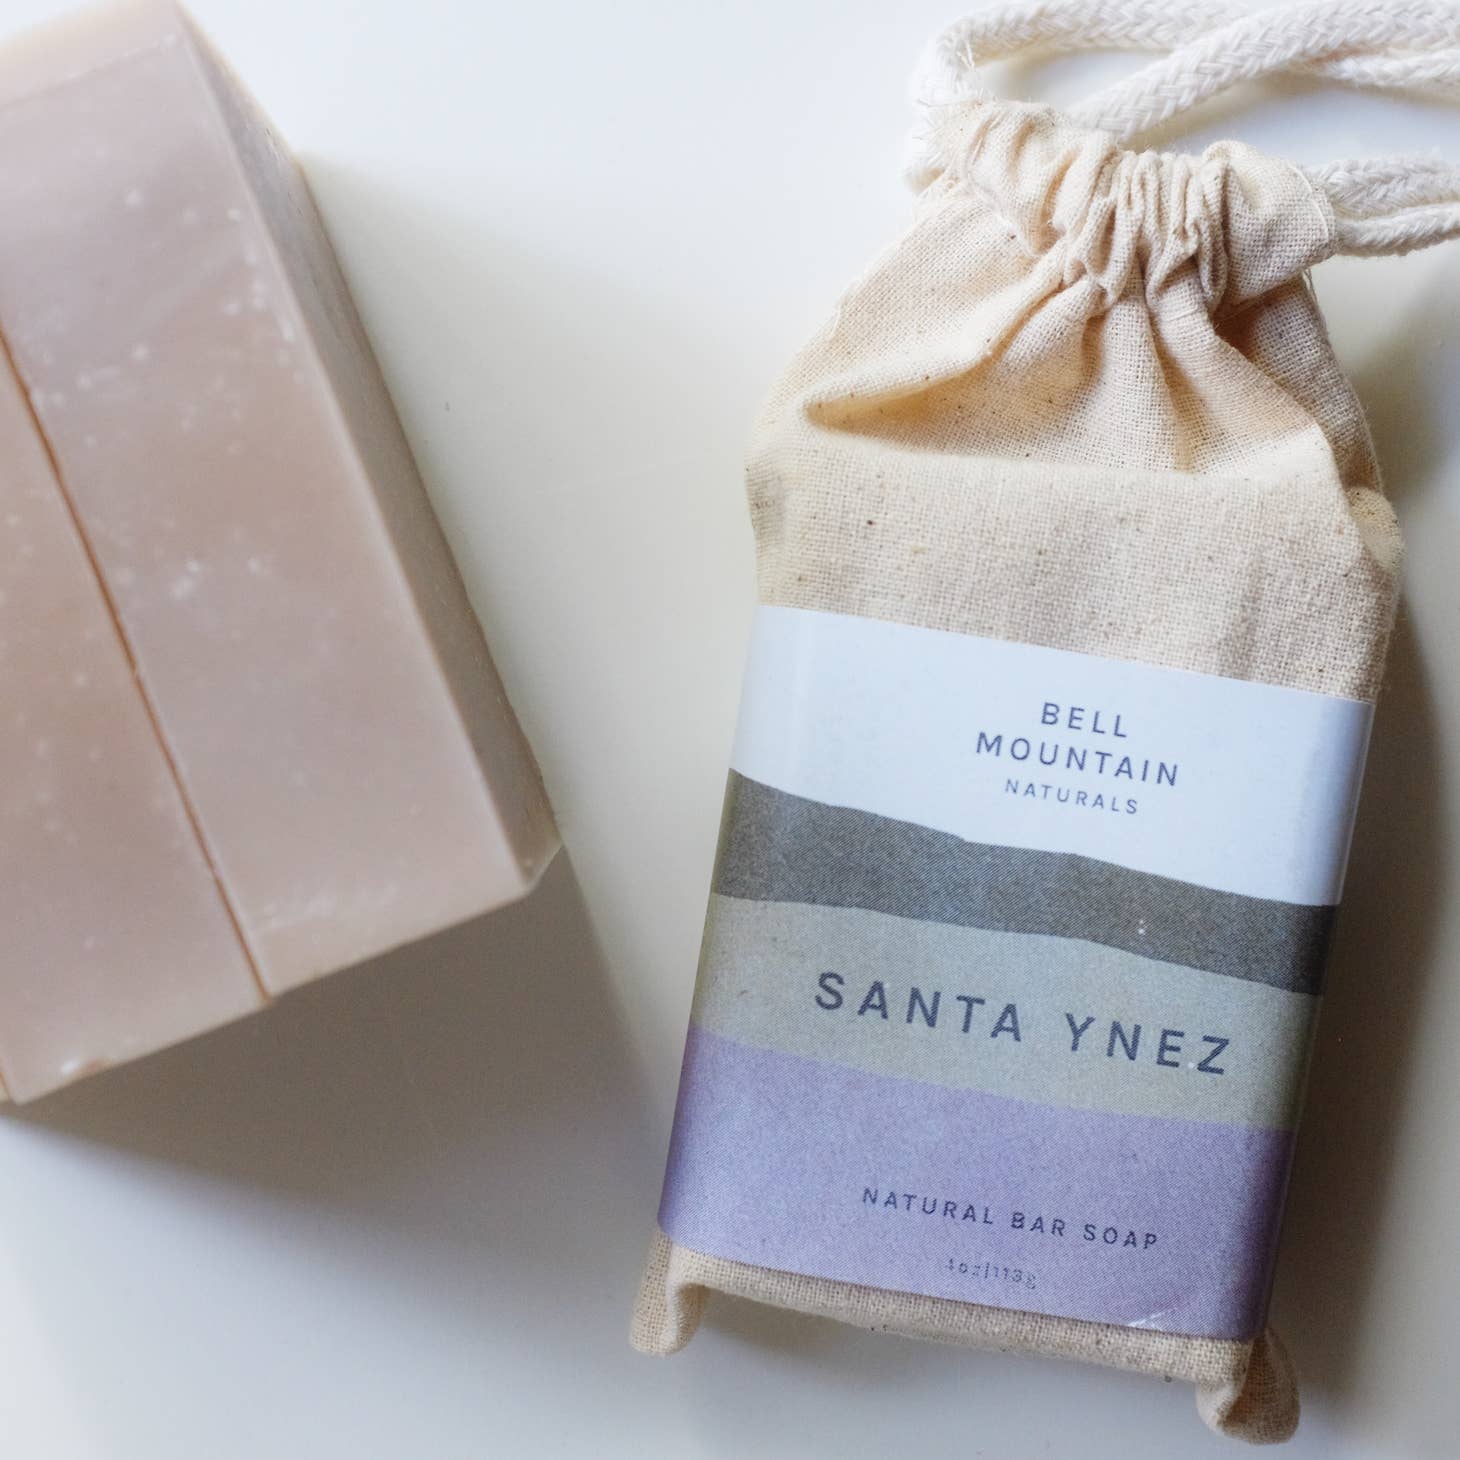 Bell Mountain Naturals' Santa Ynez soap bar, shown next to its packaging.